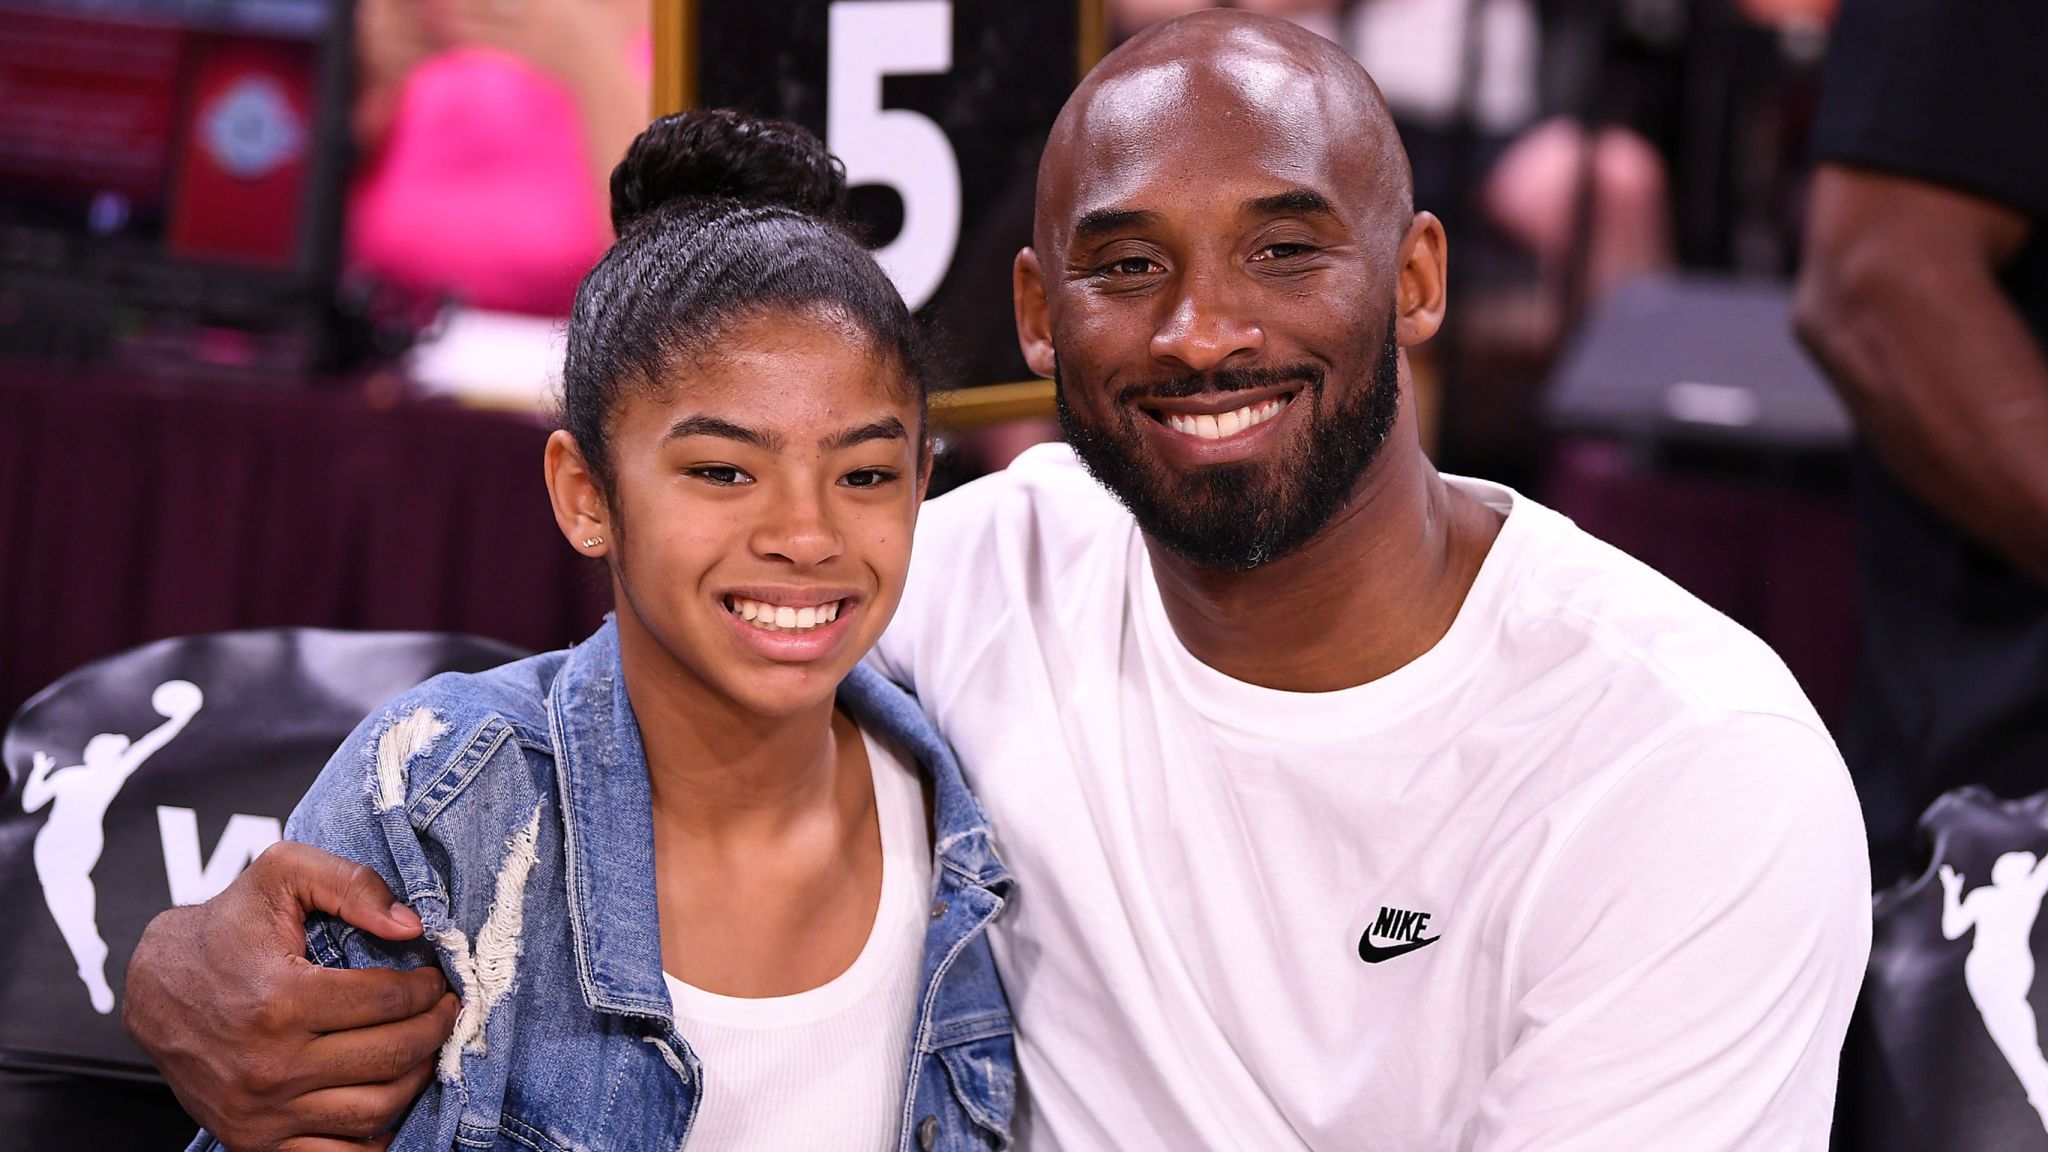 Bryant Pictured With His Daughter Gianna In Las Vegas - Kobe Bryant And Gigi - HD Wallpaper 